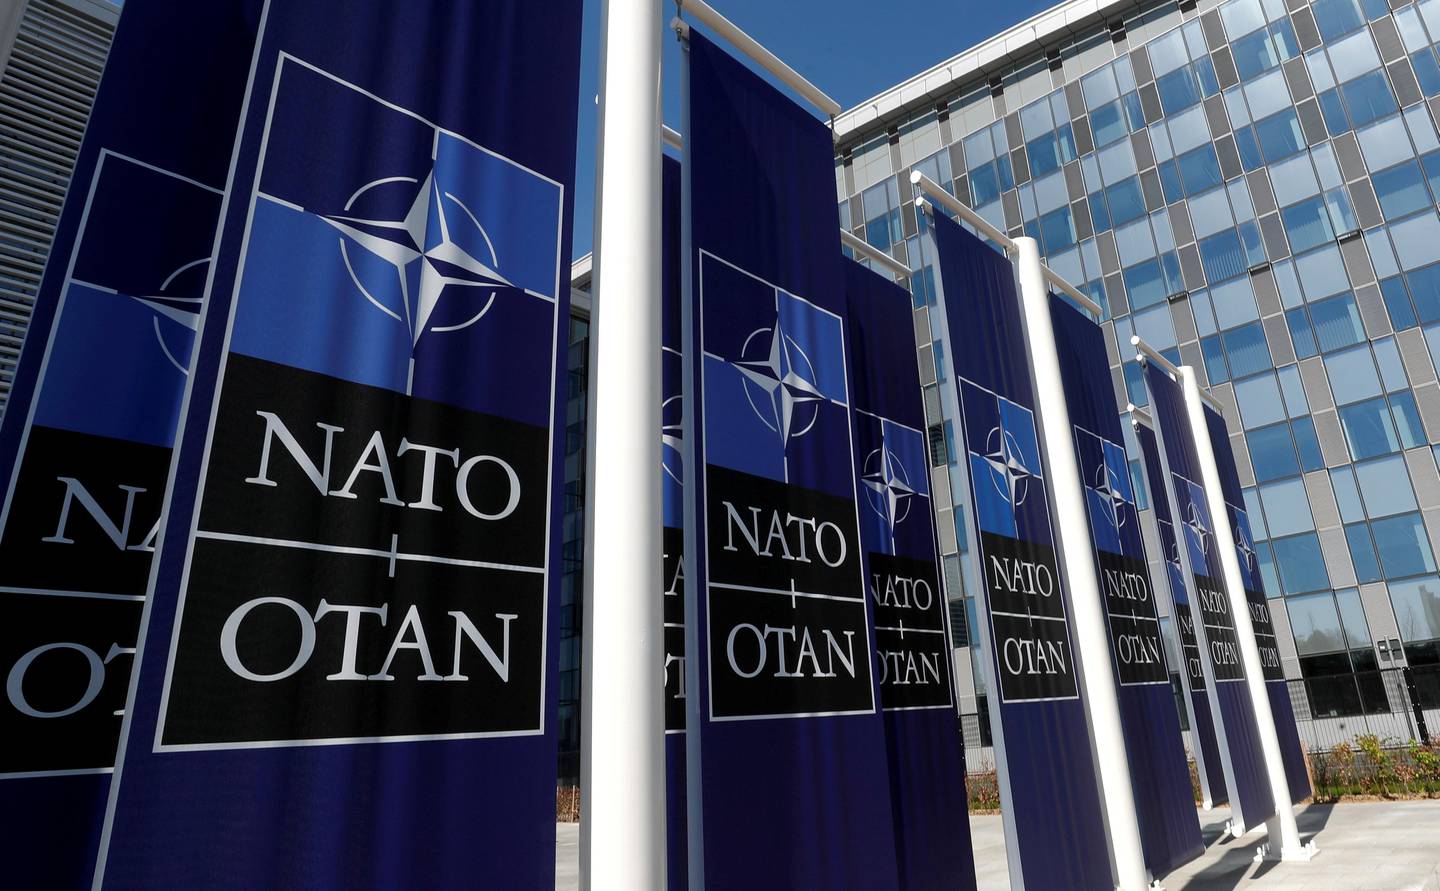 FILE PHOTO: Banners displaying the NATO logo are placed at the entrance of new NATO headquarters during the move to the new building, in Brussels, Belgium April 19, 2018.  REUTERS/Yves Herman/File Photo/File Photo